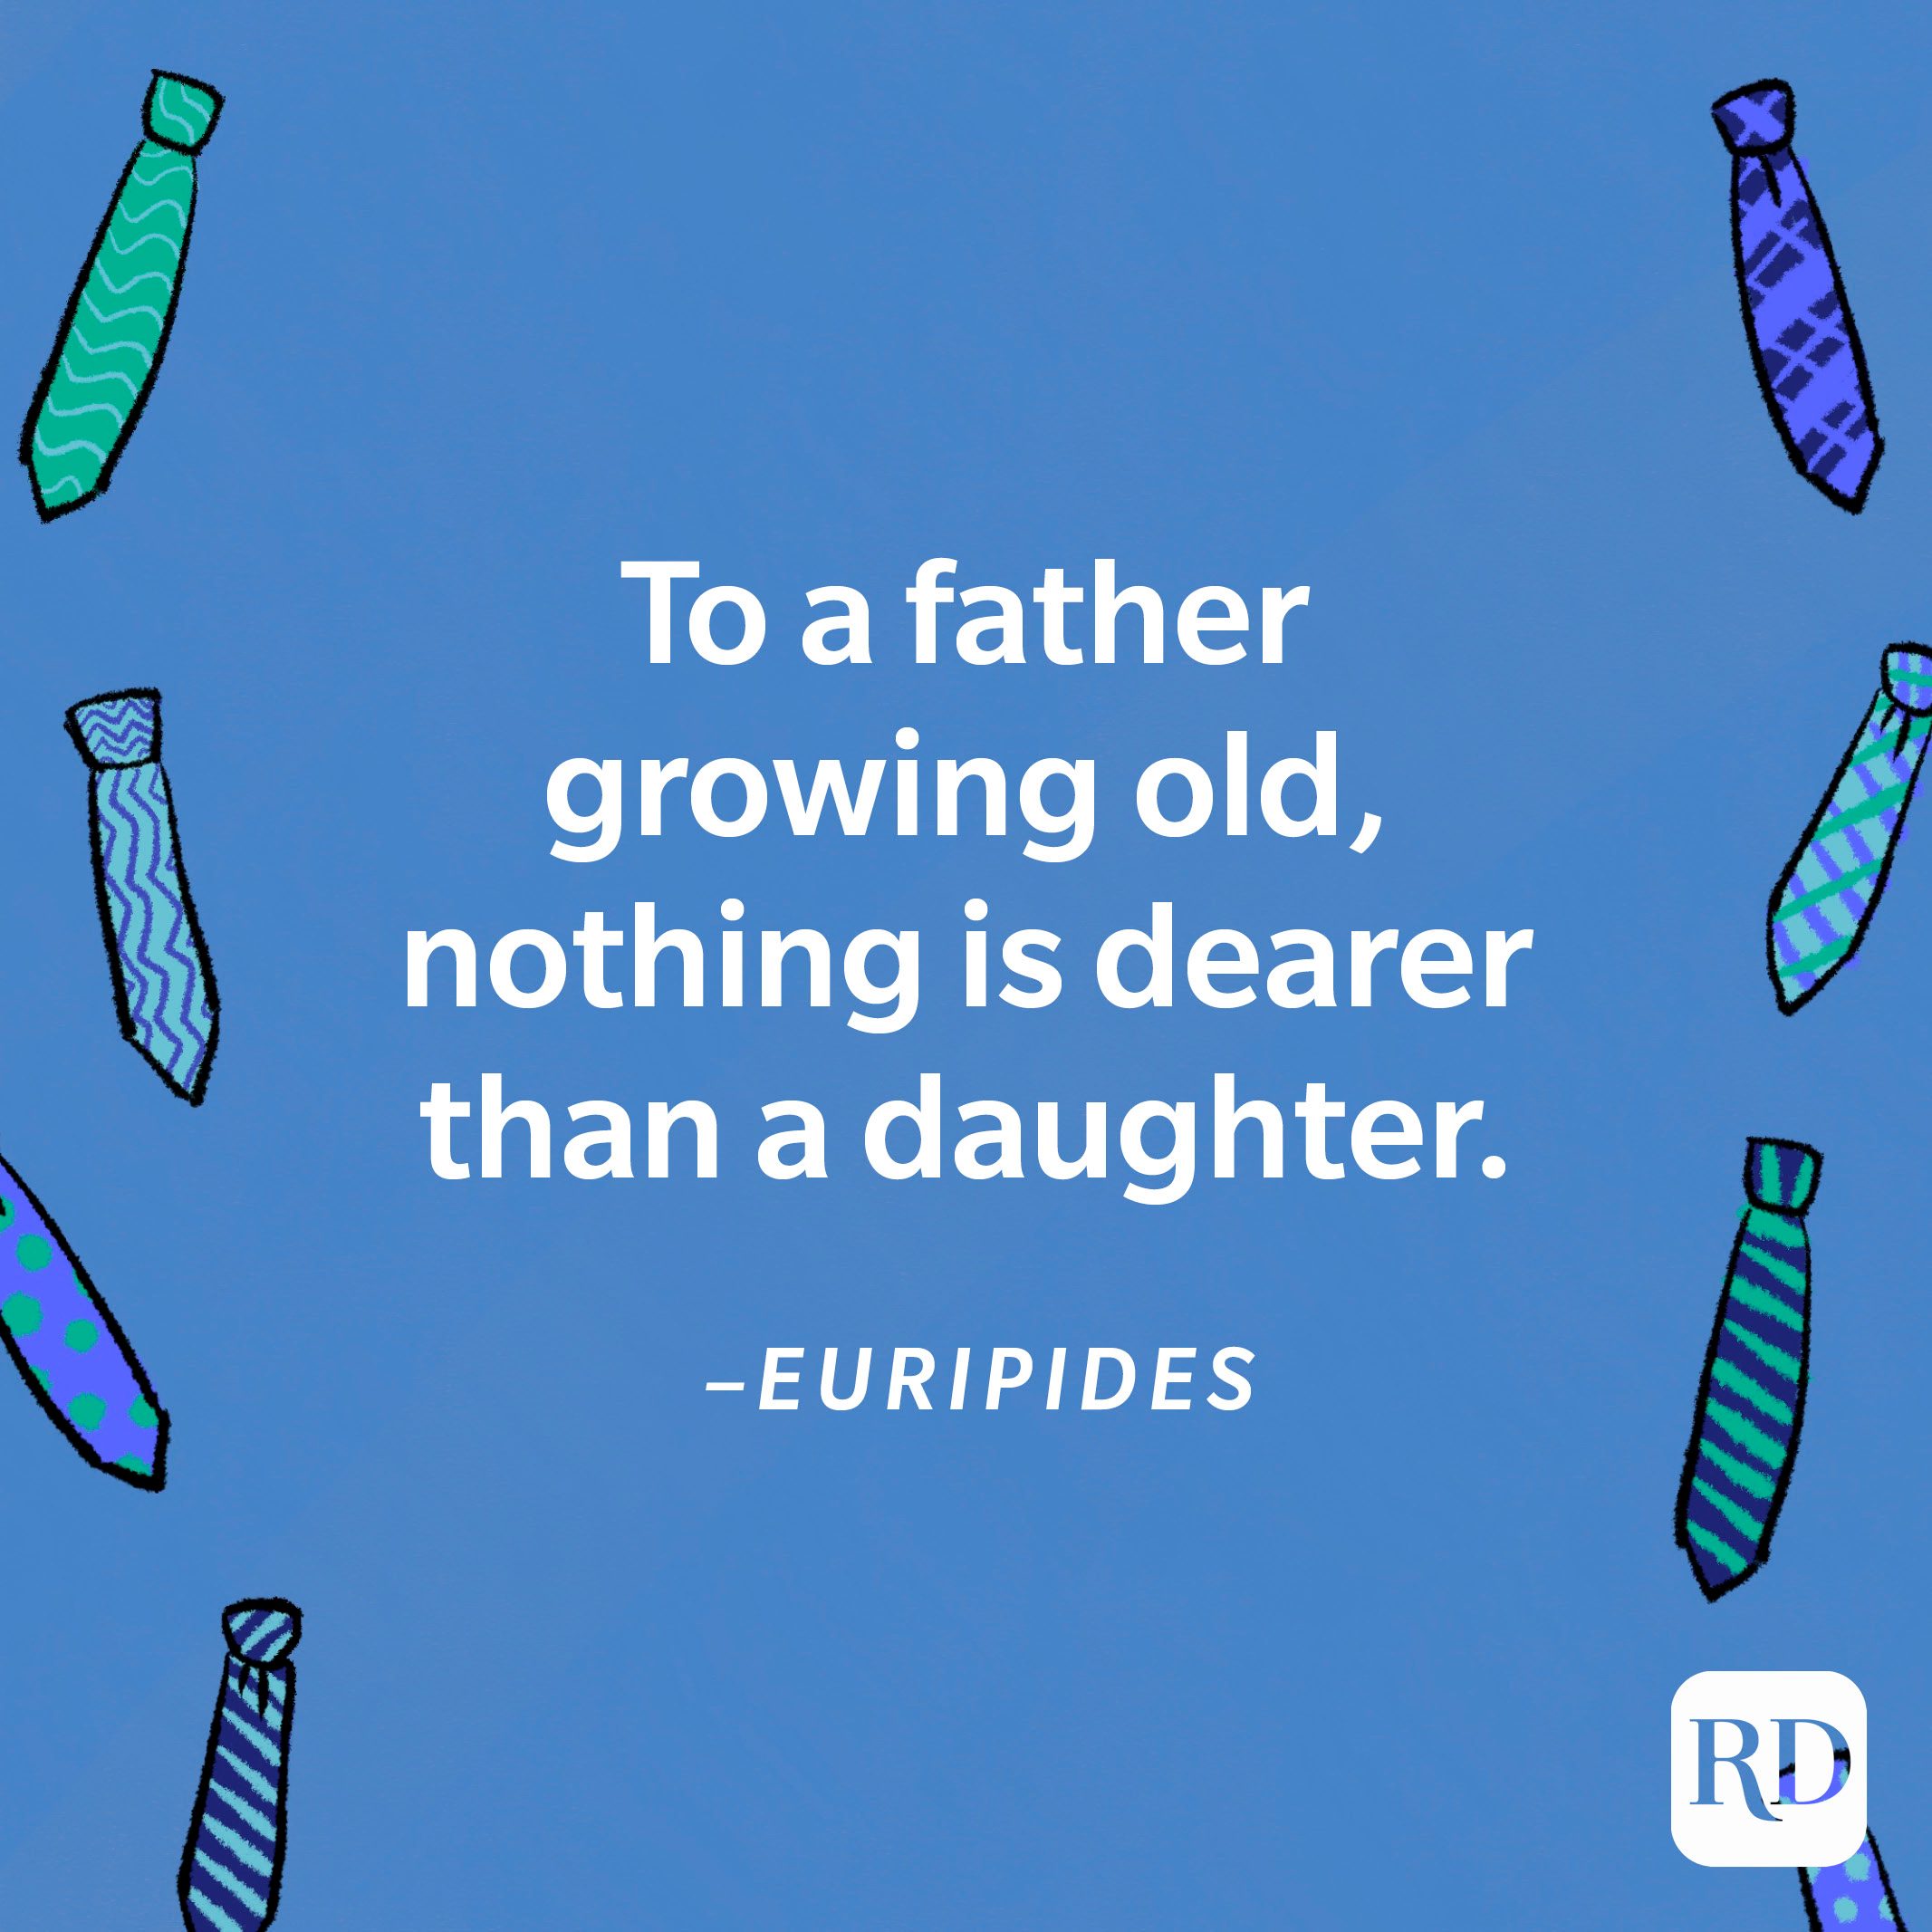 “To a father growing old, nothing is dearer than a daughter.”—Euripides 8